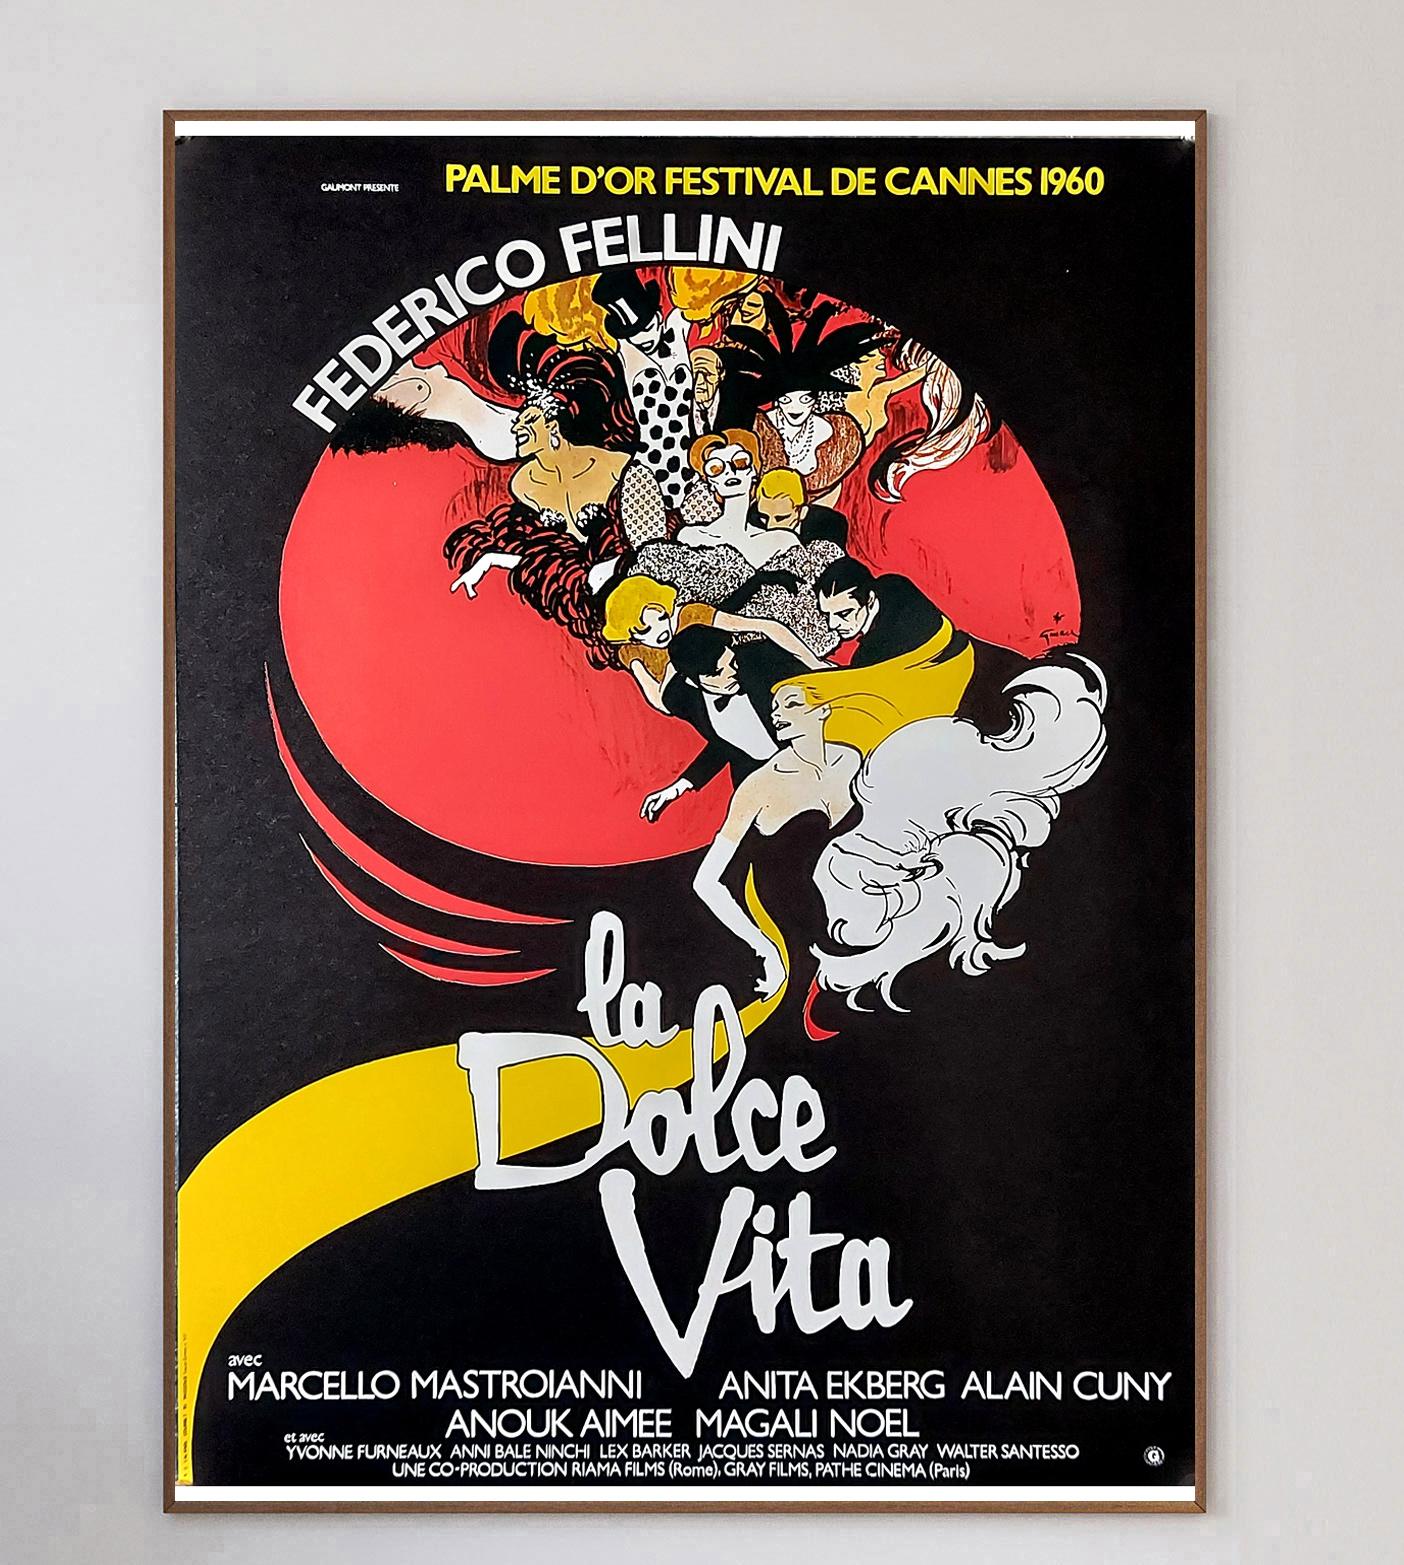 Widely regarded as one of the greatest films in world cinema, Federico Fellini's 